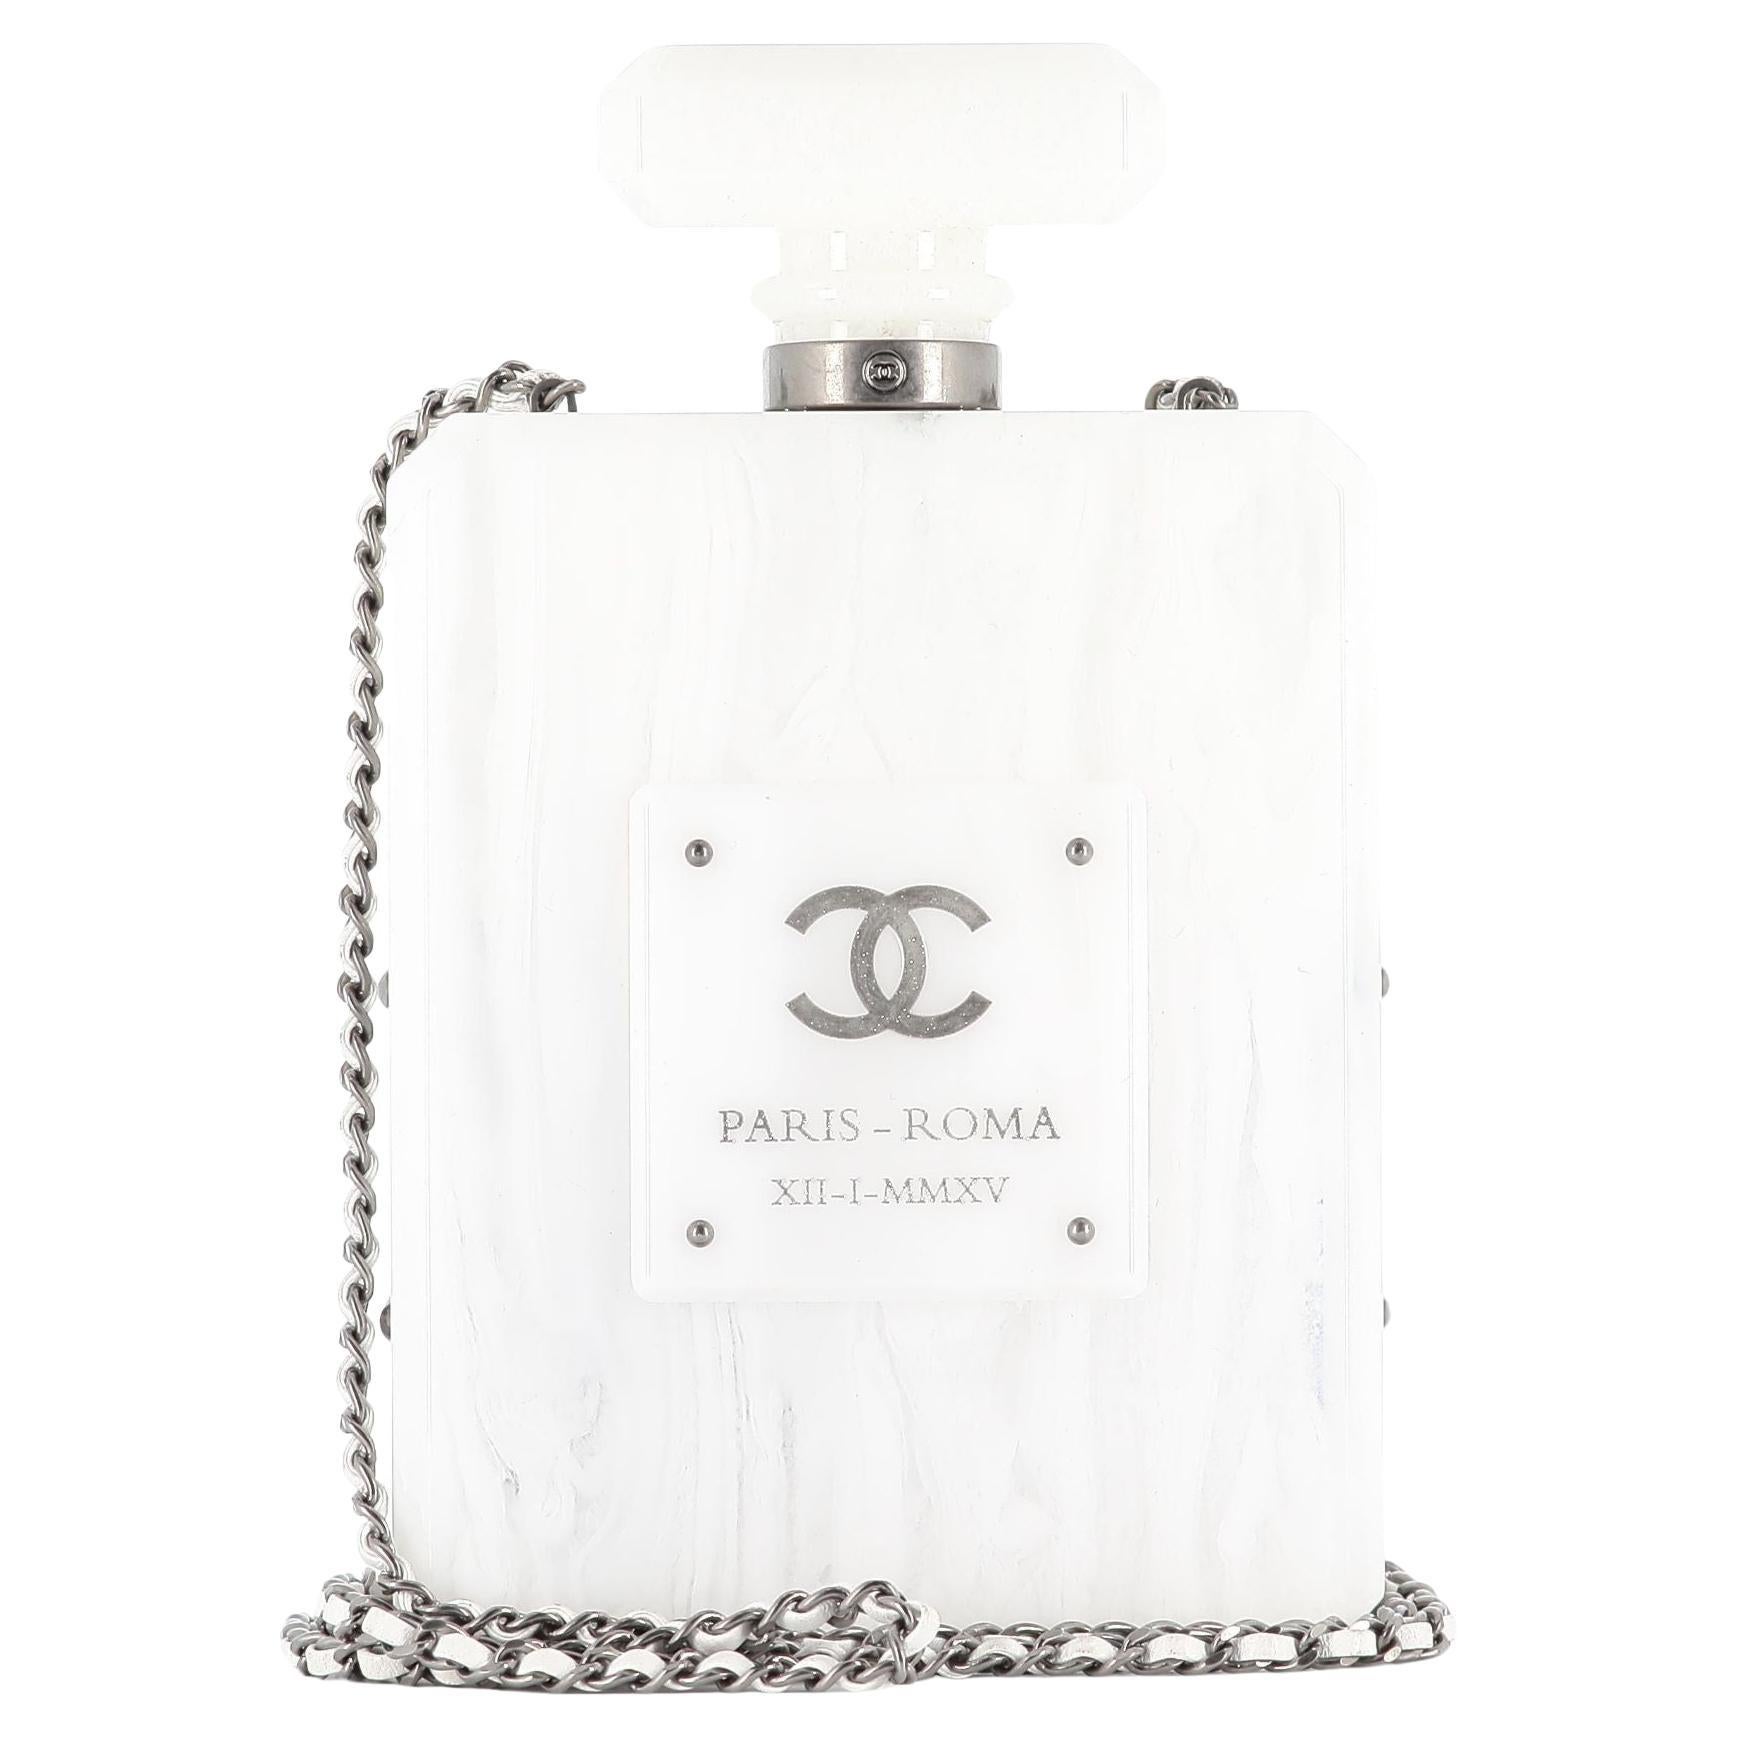 2016 Chanel N5 Paris Rome Inspired Marble Lucite Bottle Clutch at